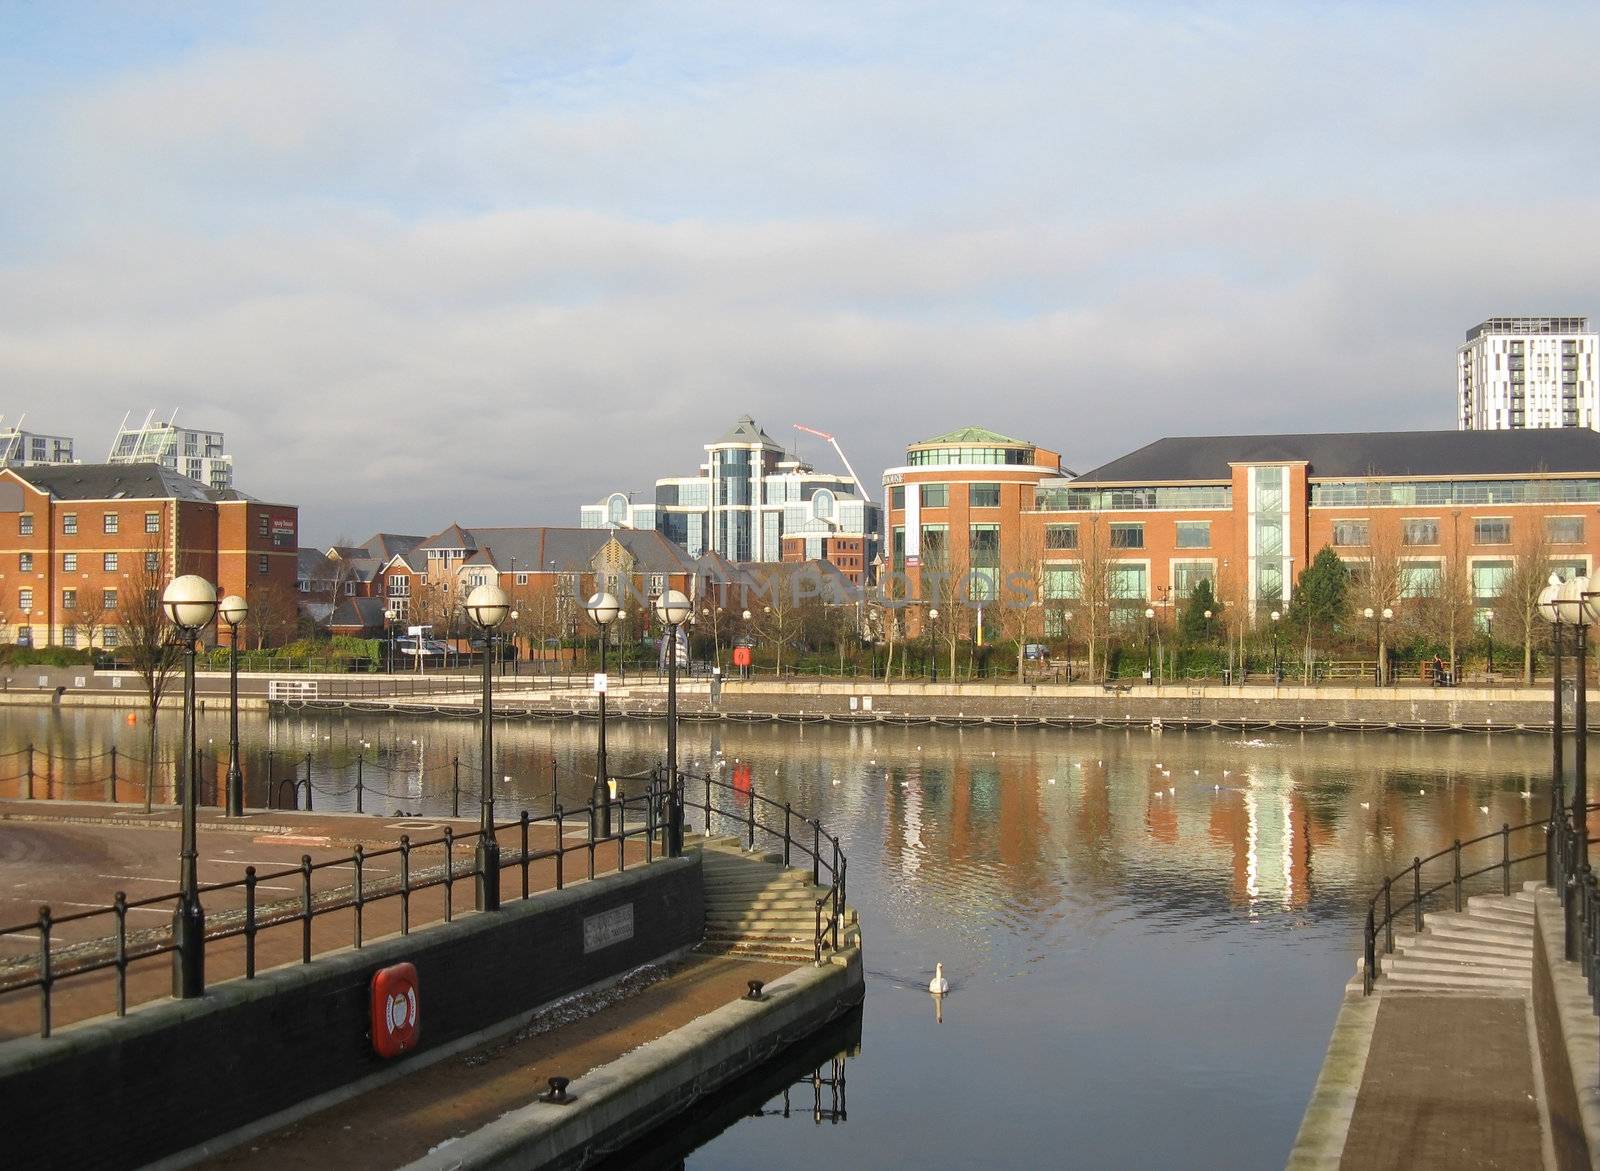 Residential buildings in Salford Quays - Nice and modern area in Manchester.